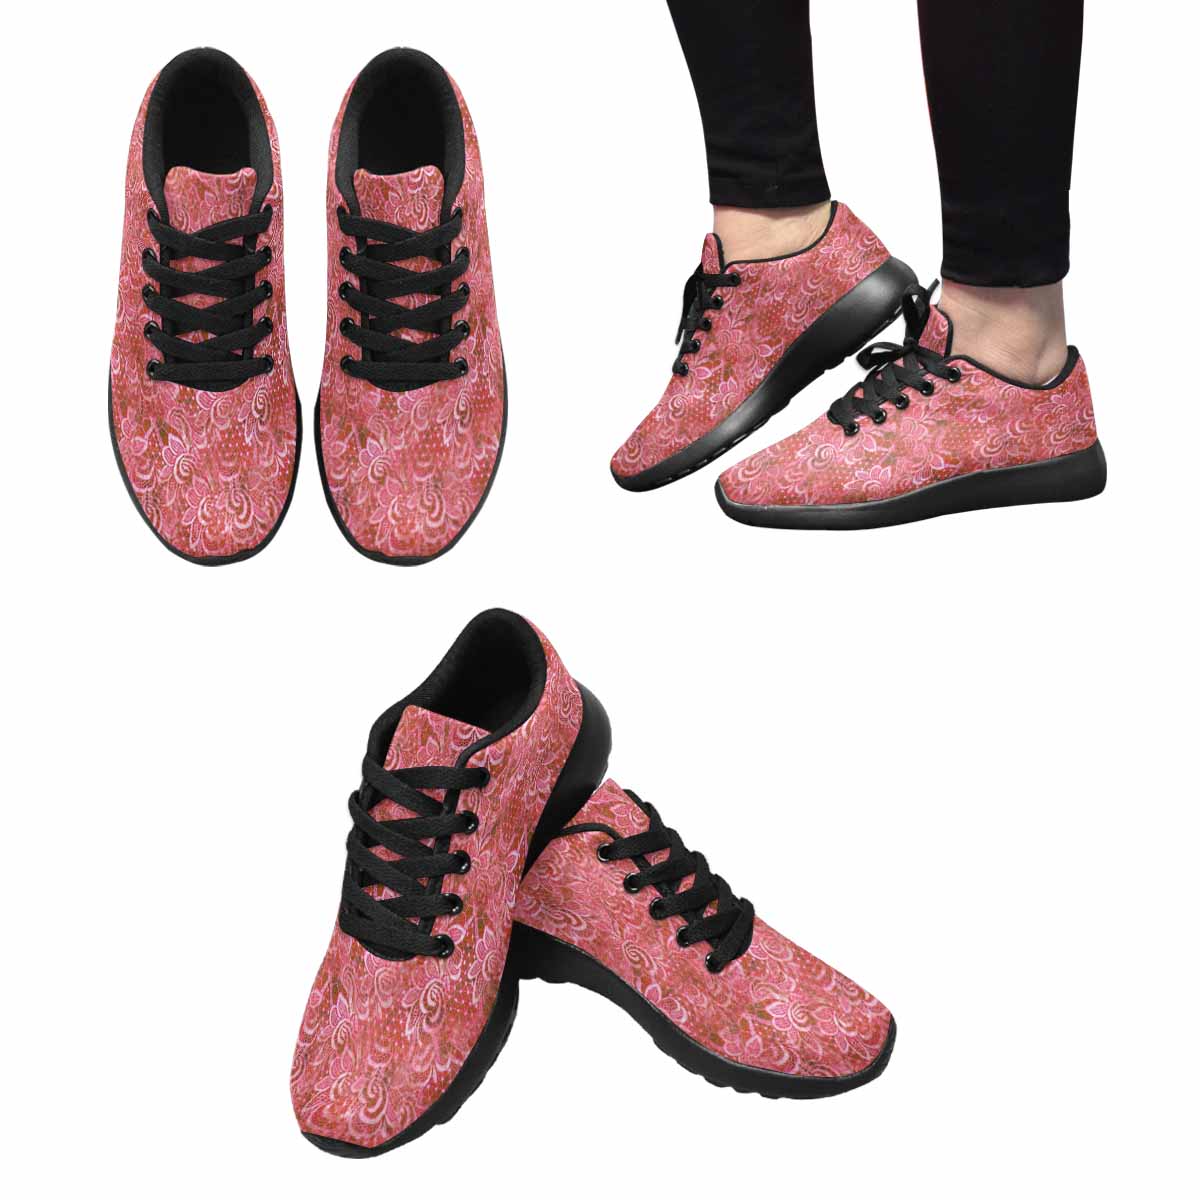 Victorian lace print, womens cute casual or running sneakers, design 33